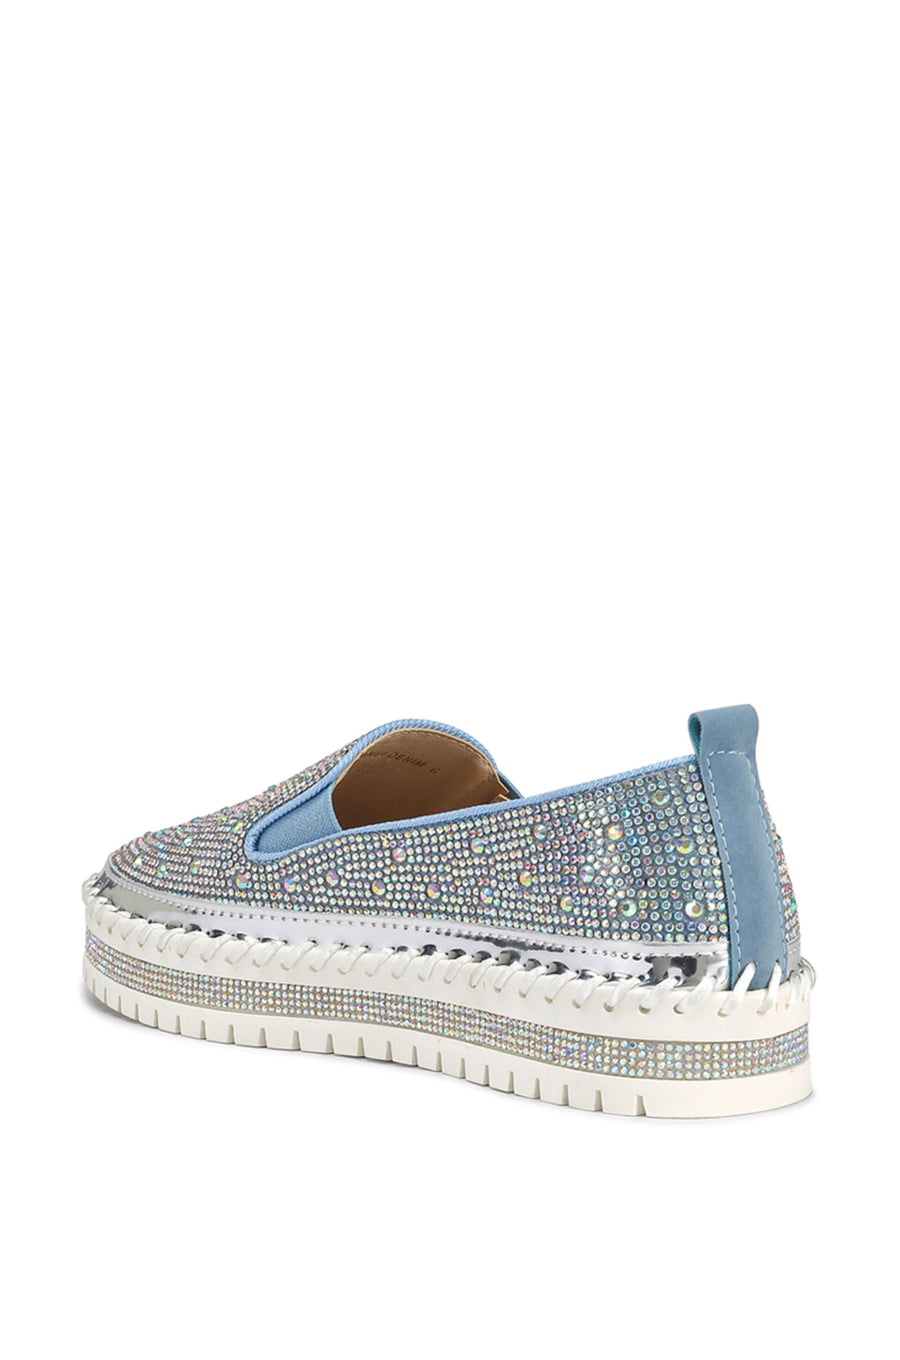 back view of slip on light wash denim flat sneakers with crystal rhinestone embellishments and a white braided platform sole